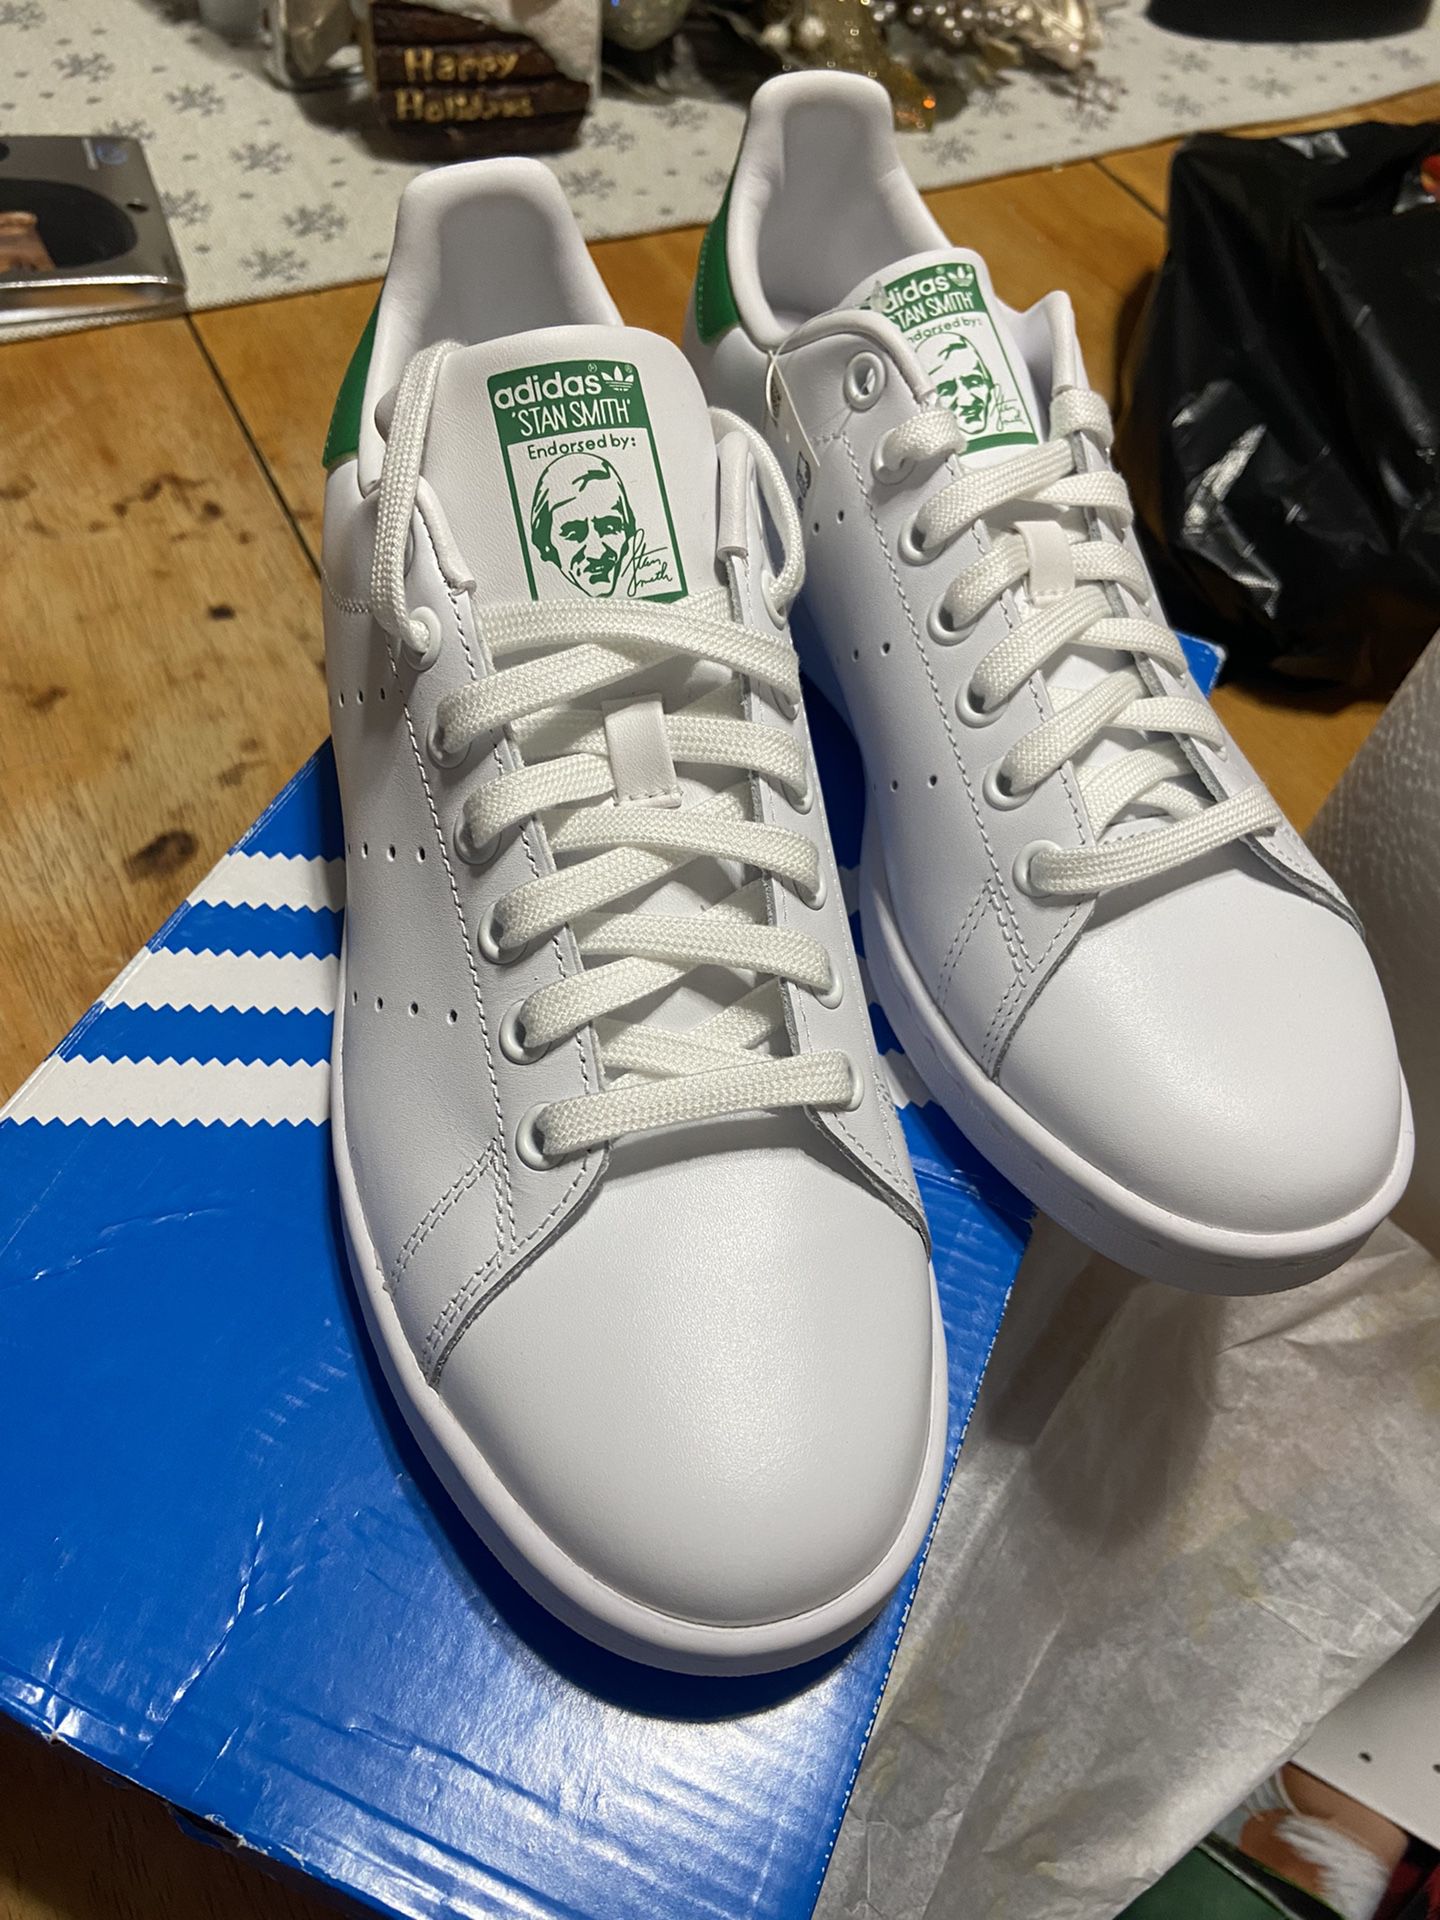 Stan Adidas Women Size 9 for Sale in The Bronx, NY - OfferUp